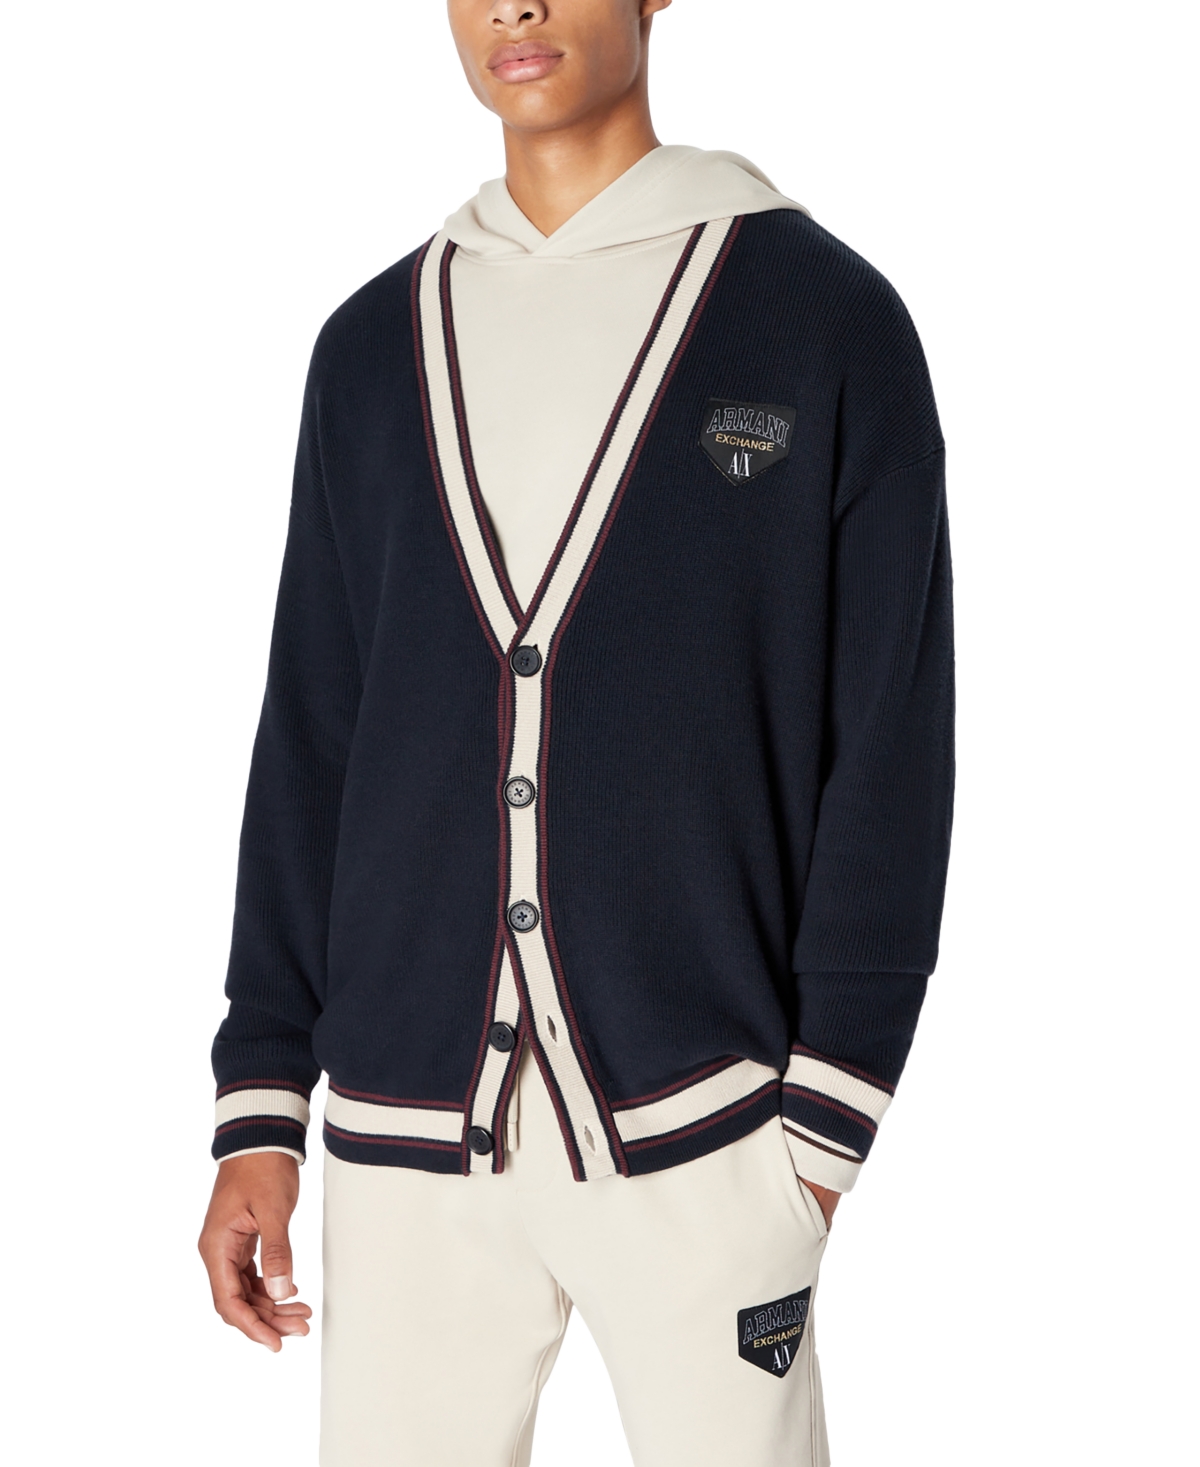 Ax Armani Exchange Men's Long-sleeve Collegiate Button-front Cardigan Sweater In Navy